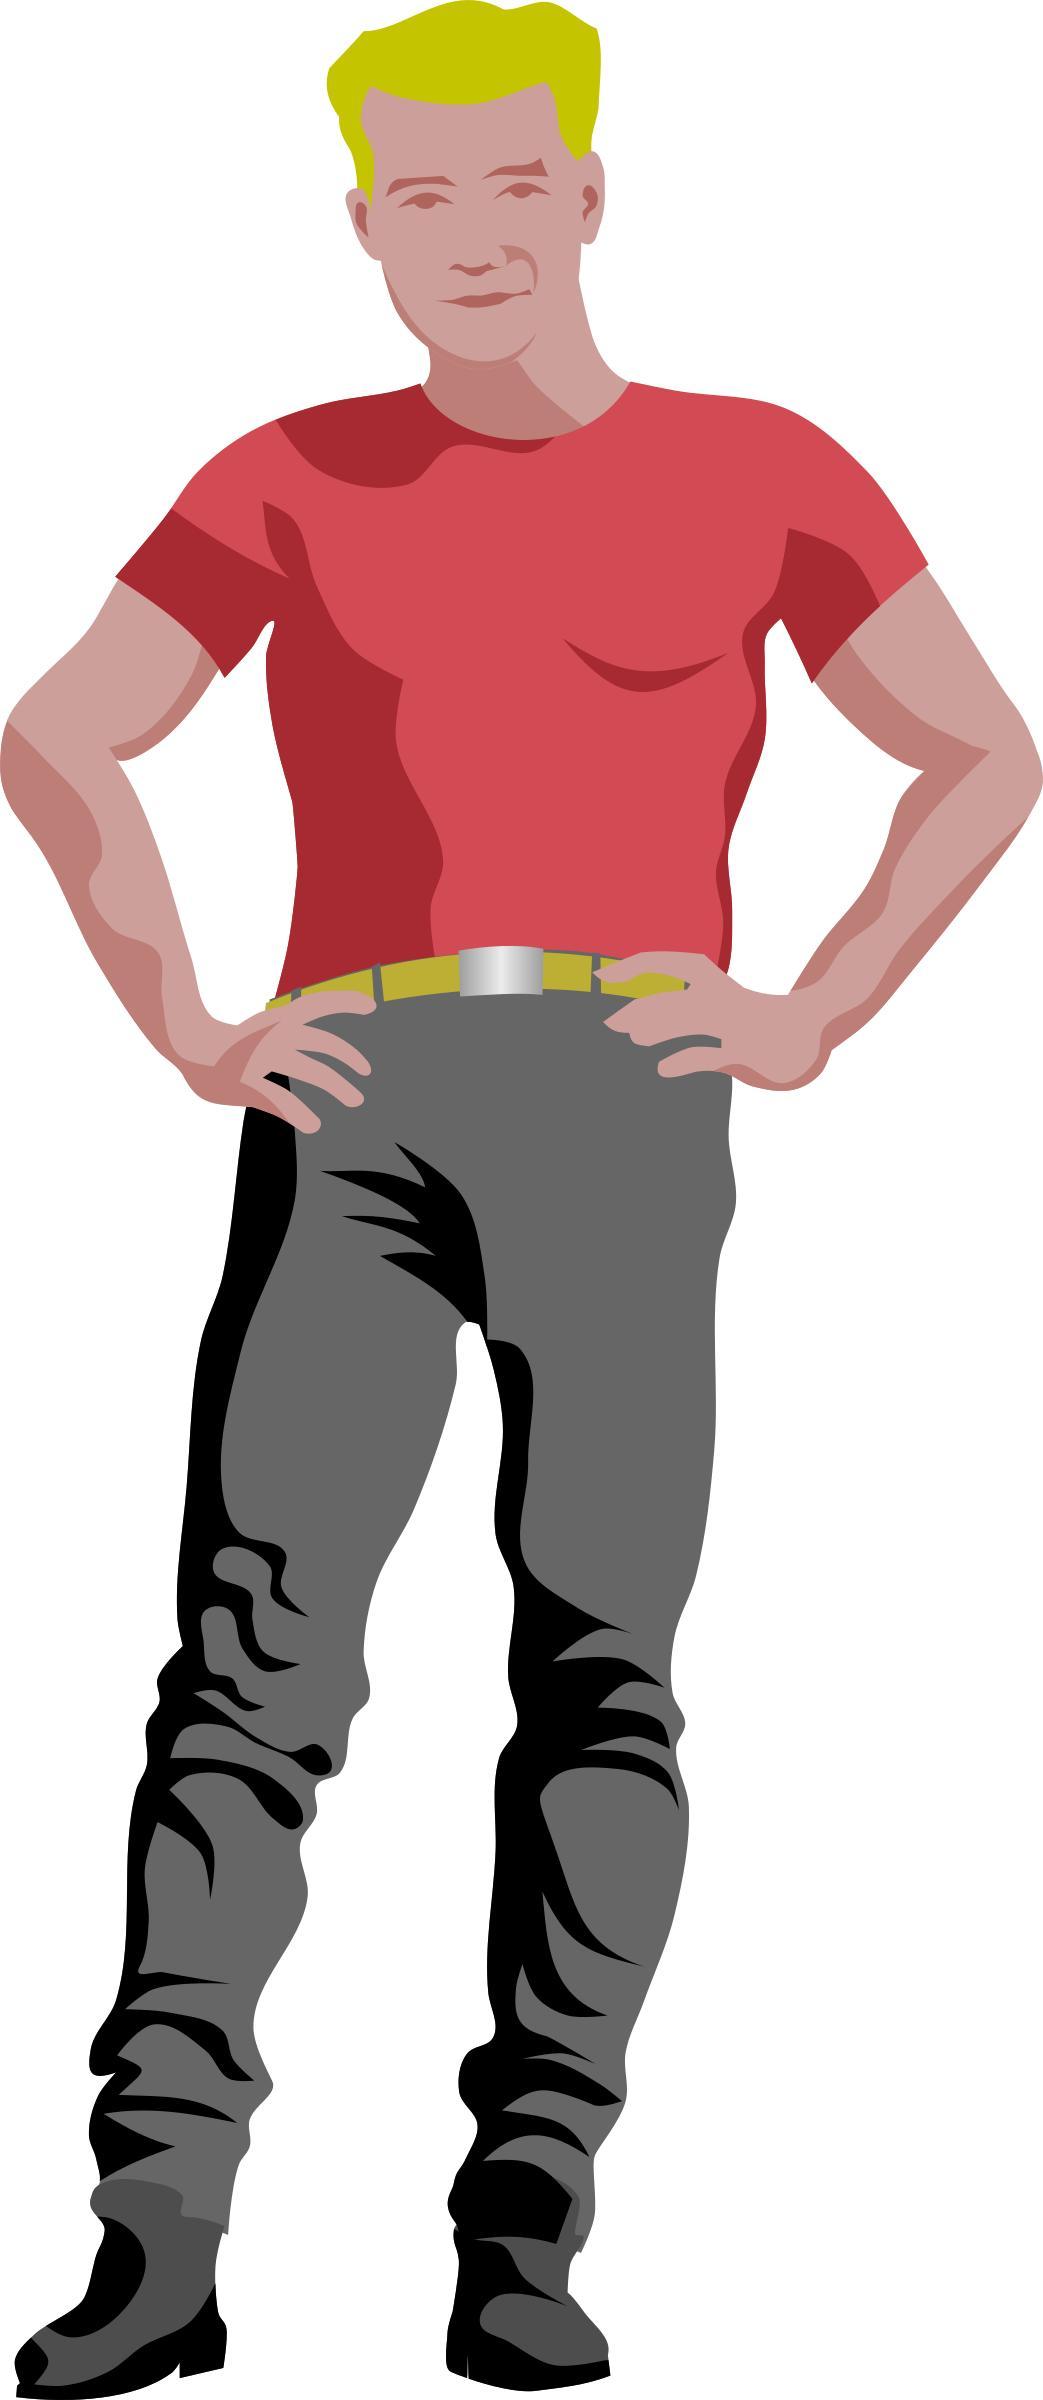 Assertive guy by Rones. Posterized png transparent